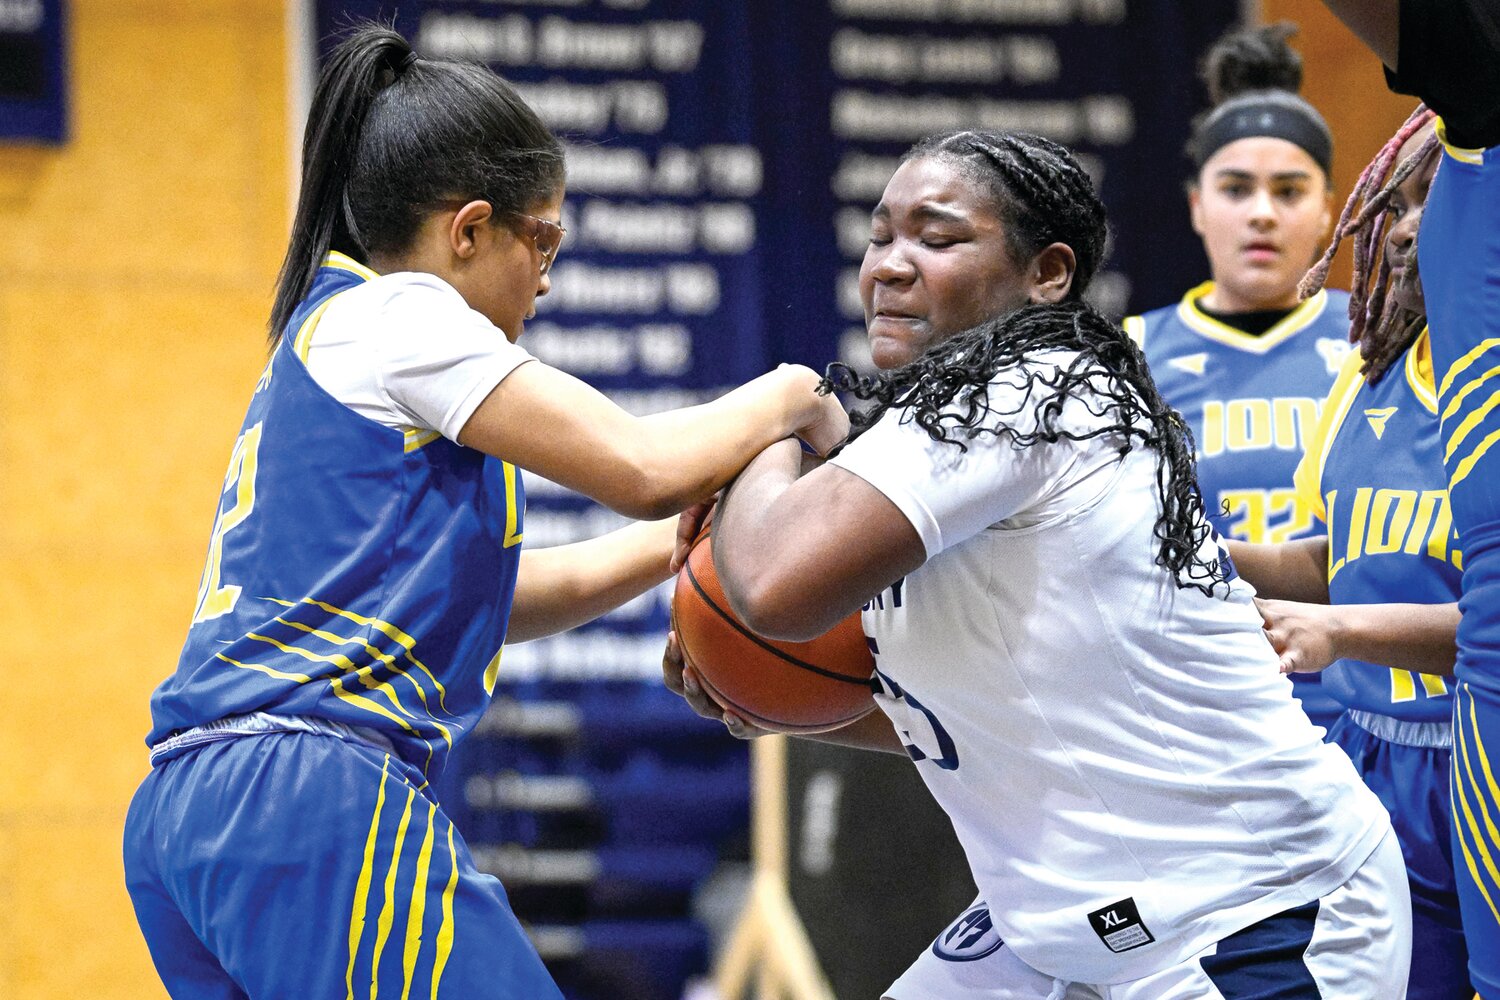 Solebury School’s Autumn Turner and City’s Jannah Muhammad battle for a rebound in the third quarter.